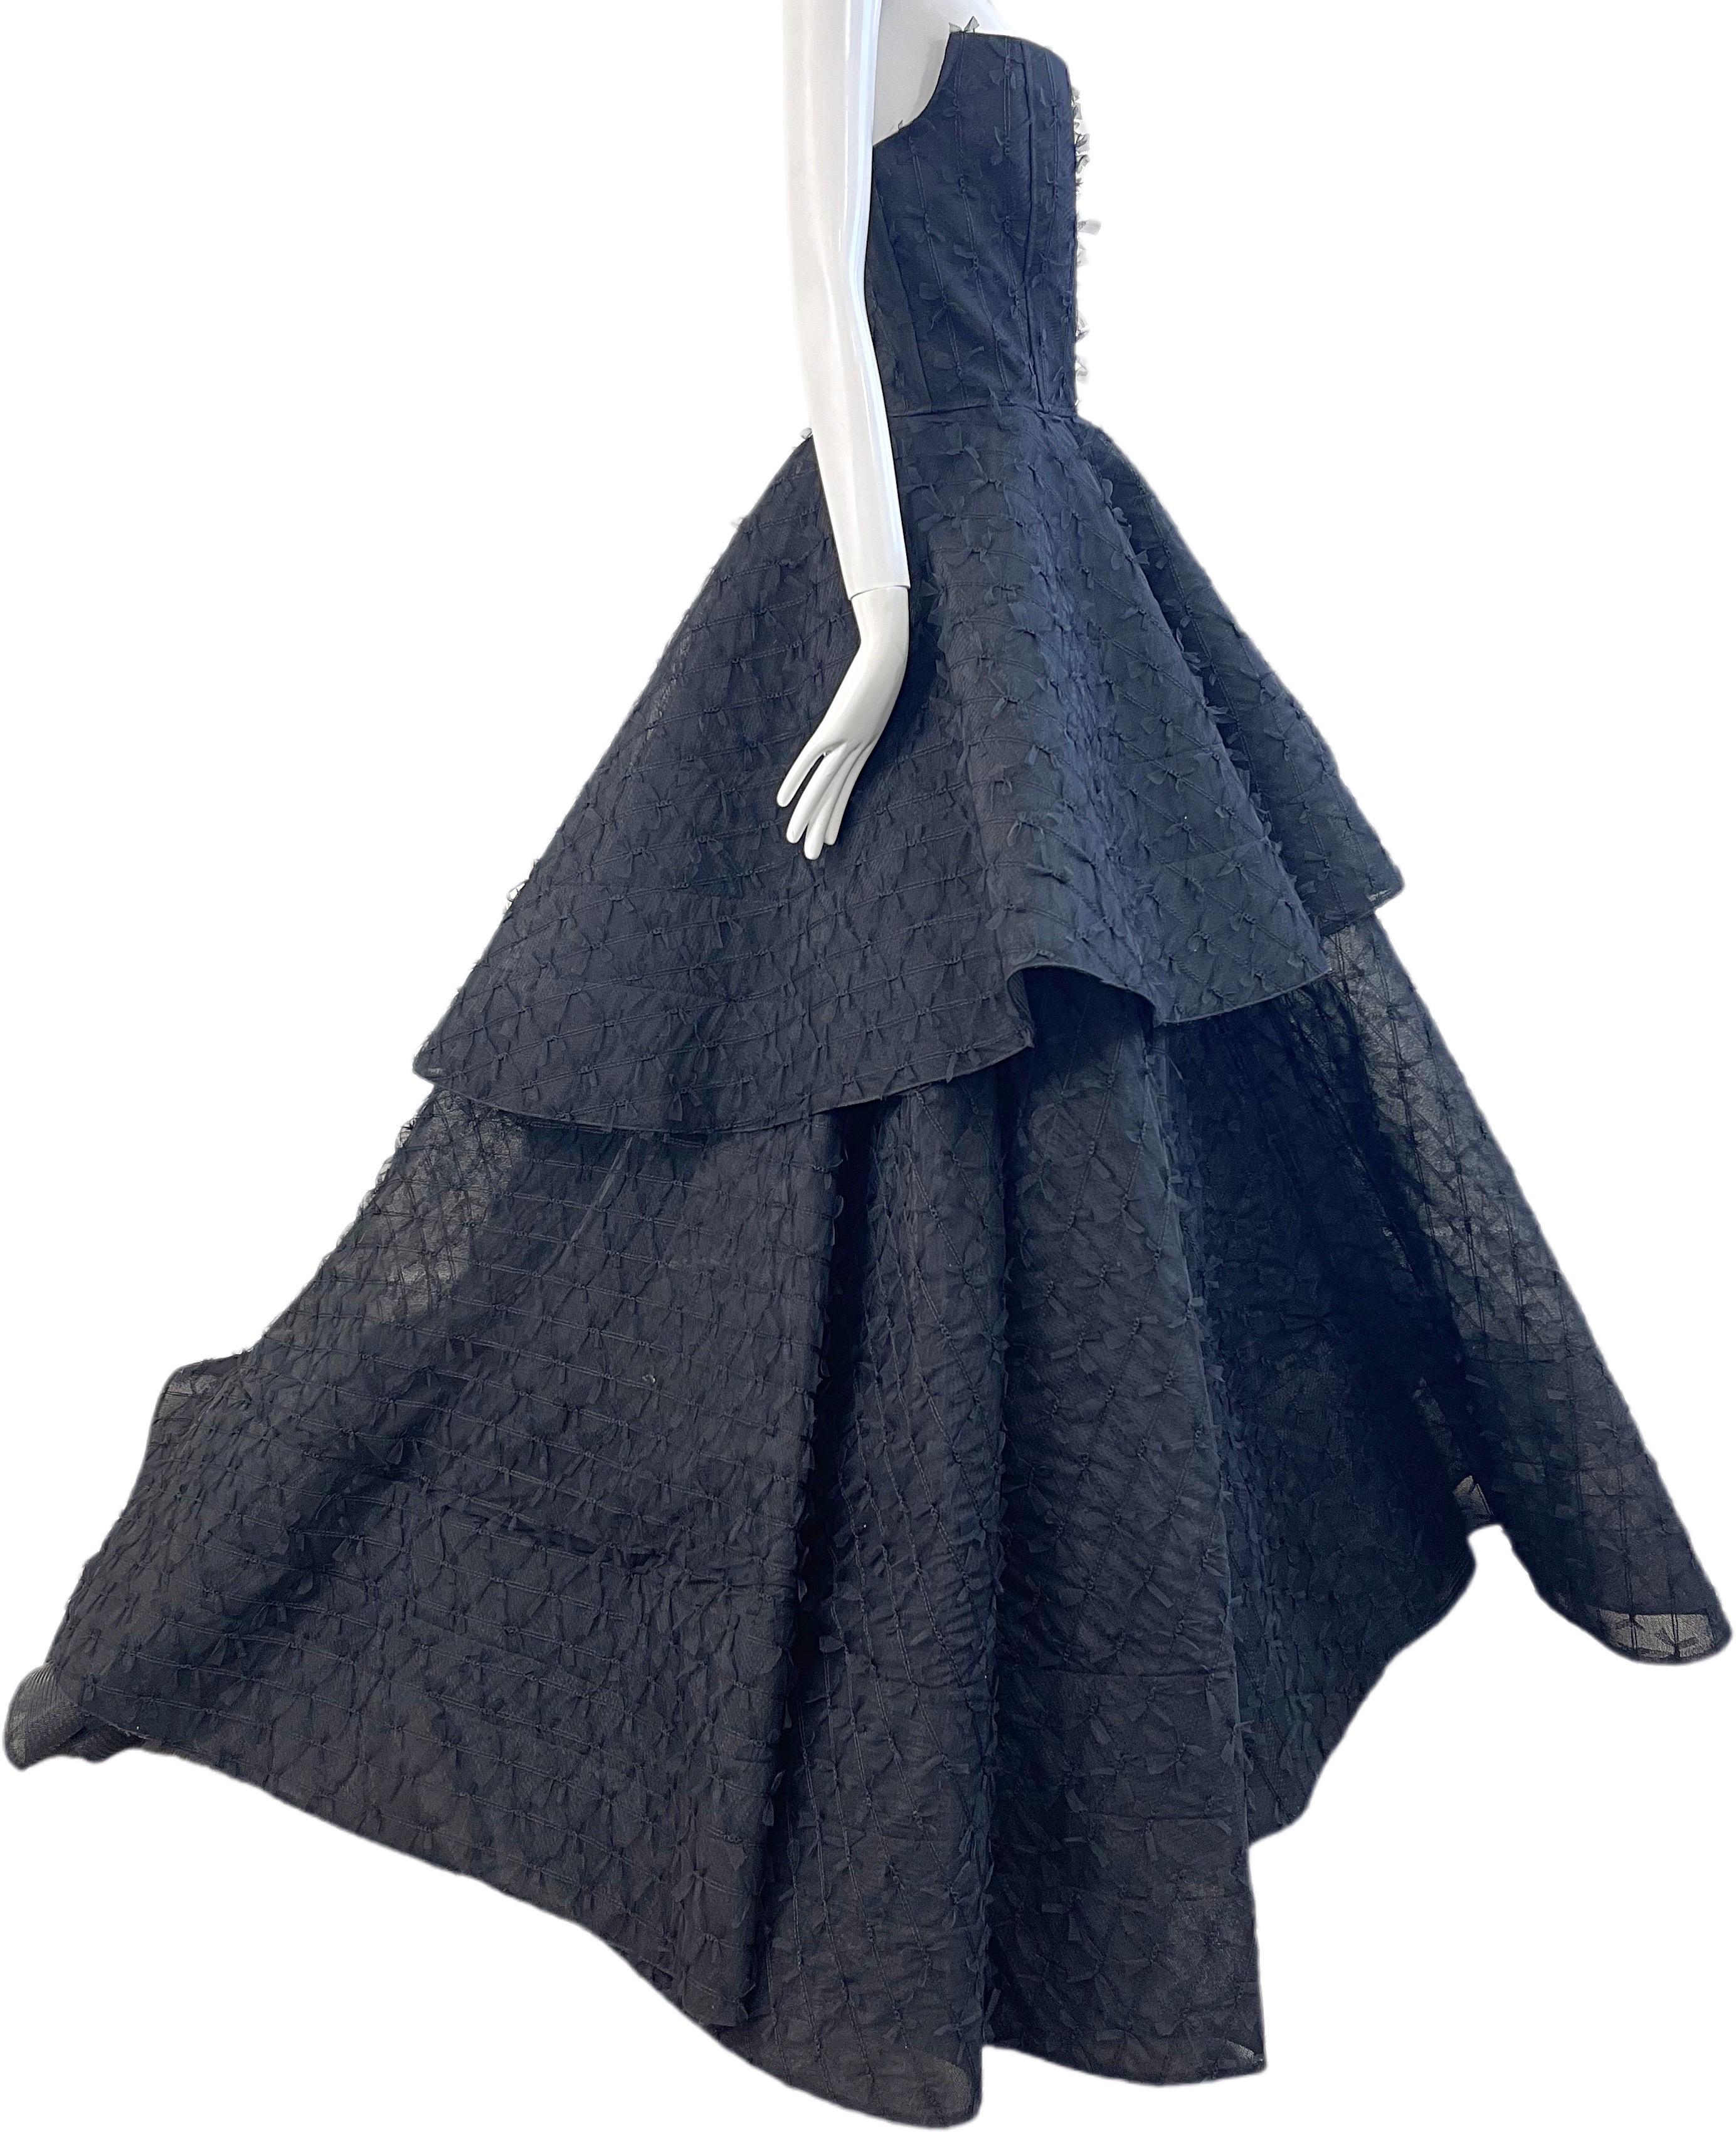 Christian Siriano Couture Spring 2019 Runway Size 4 / 6 Black Horsehair Gown For Sale 3